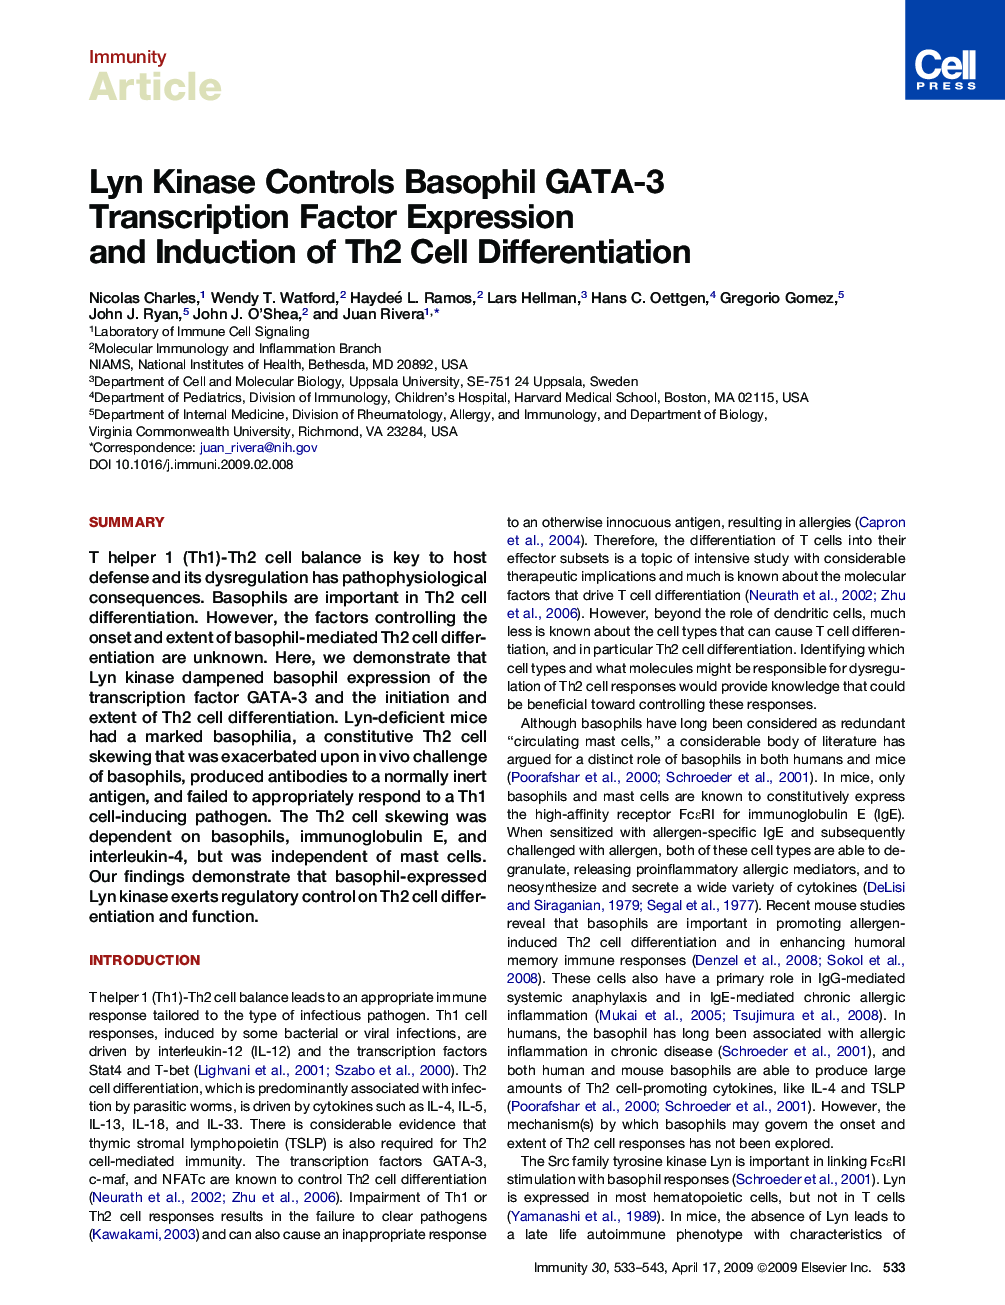 Lyn Kinase Controls Basophil GATA-3 Transcription Factor Expression and Induction of Th2 Cell Differentiation